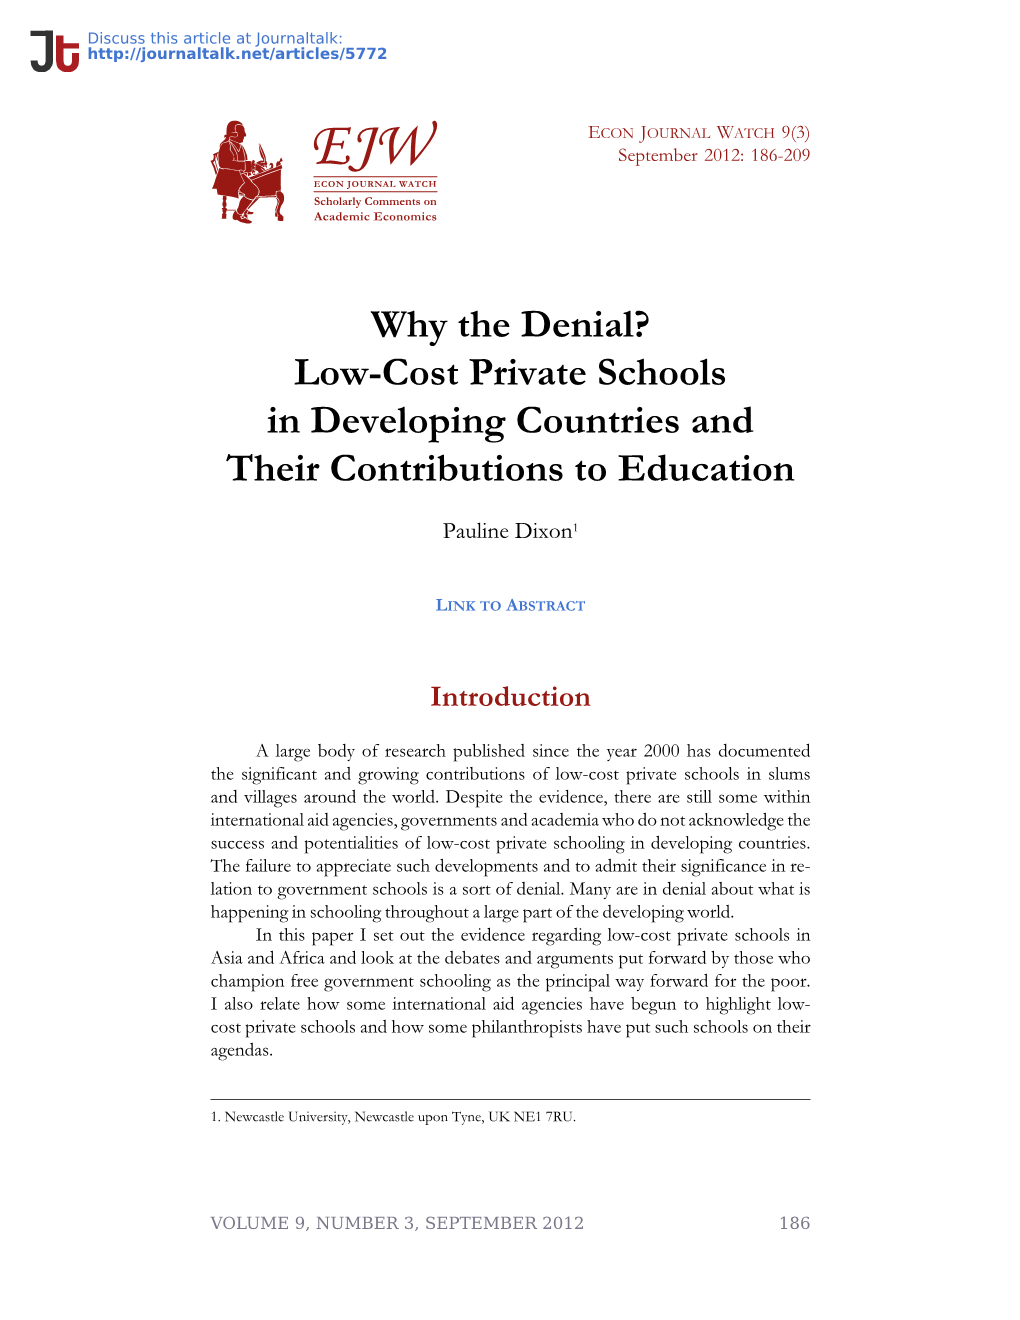 Why the Denial? Low-Cost Private Schools in Developing Countries and Their Contributions to Education · Econ Journal Watch